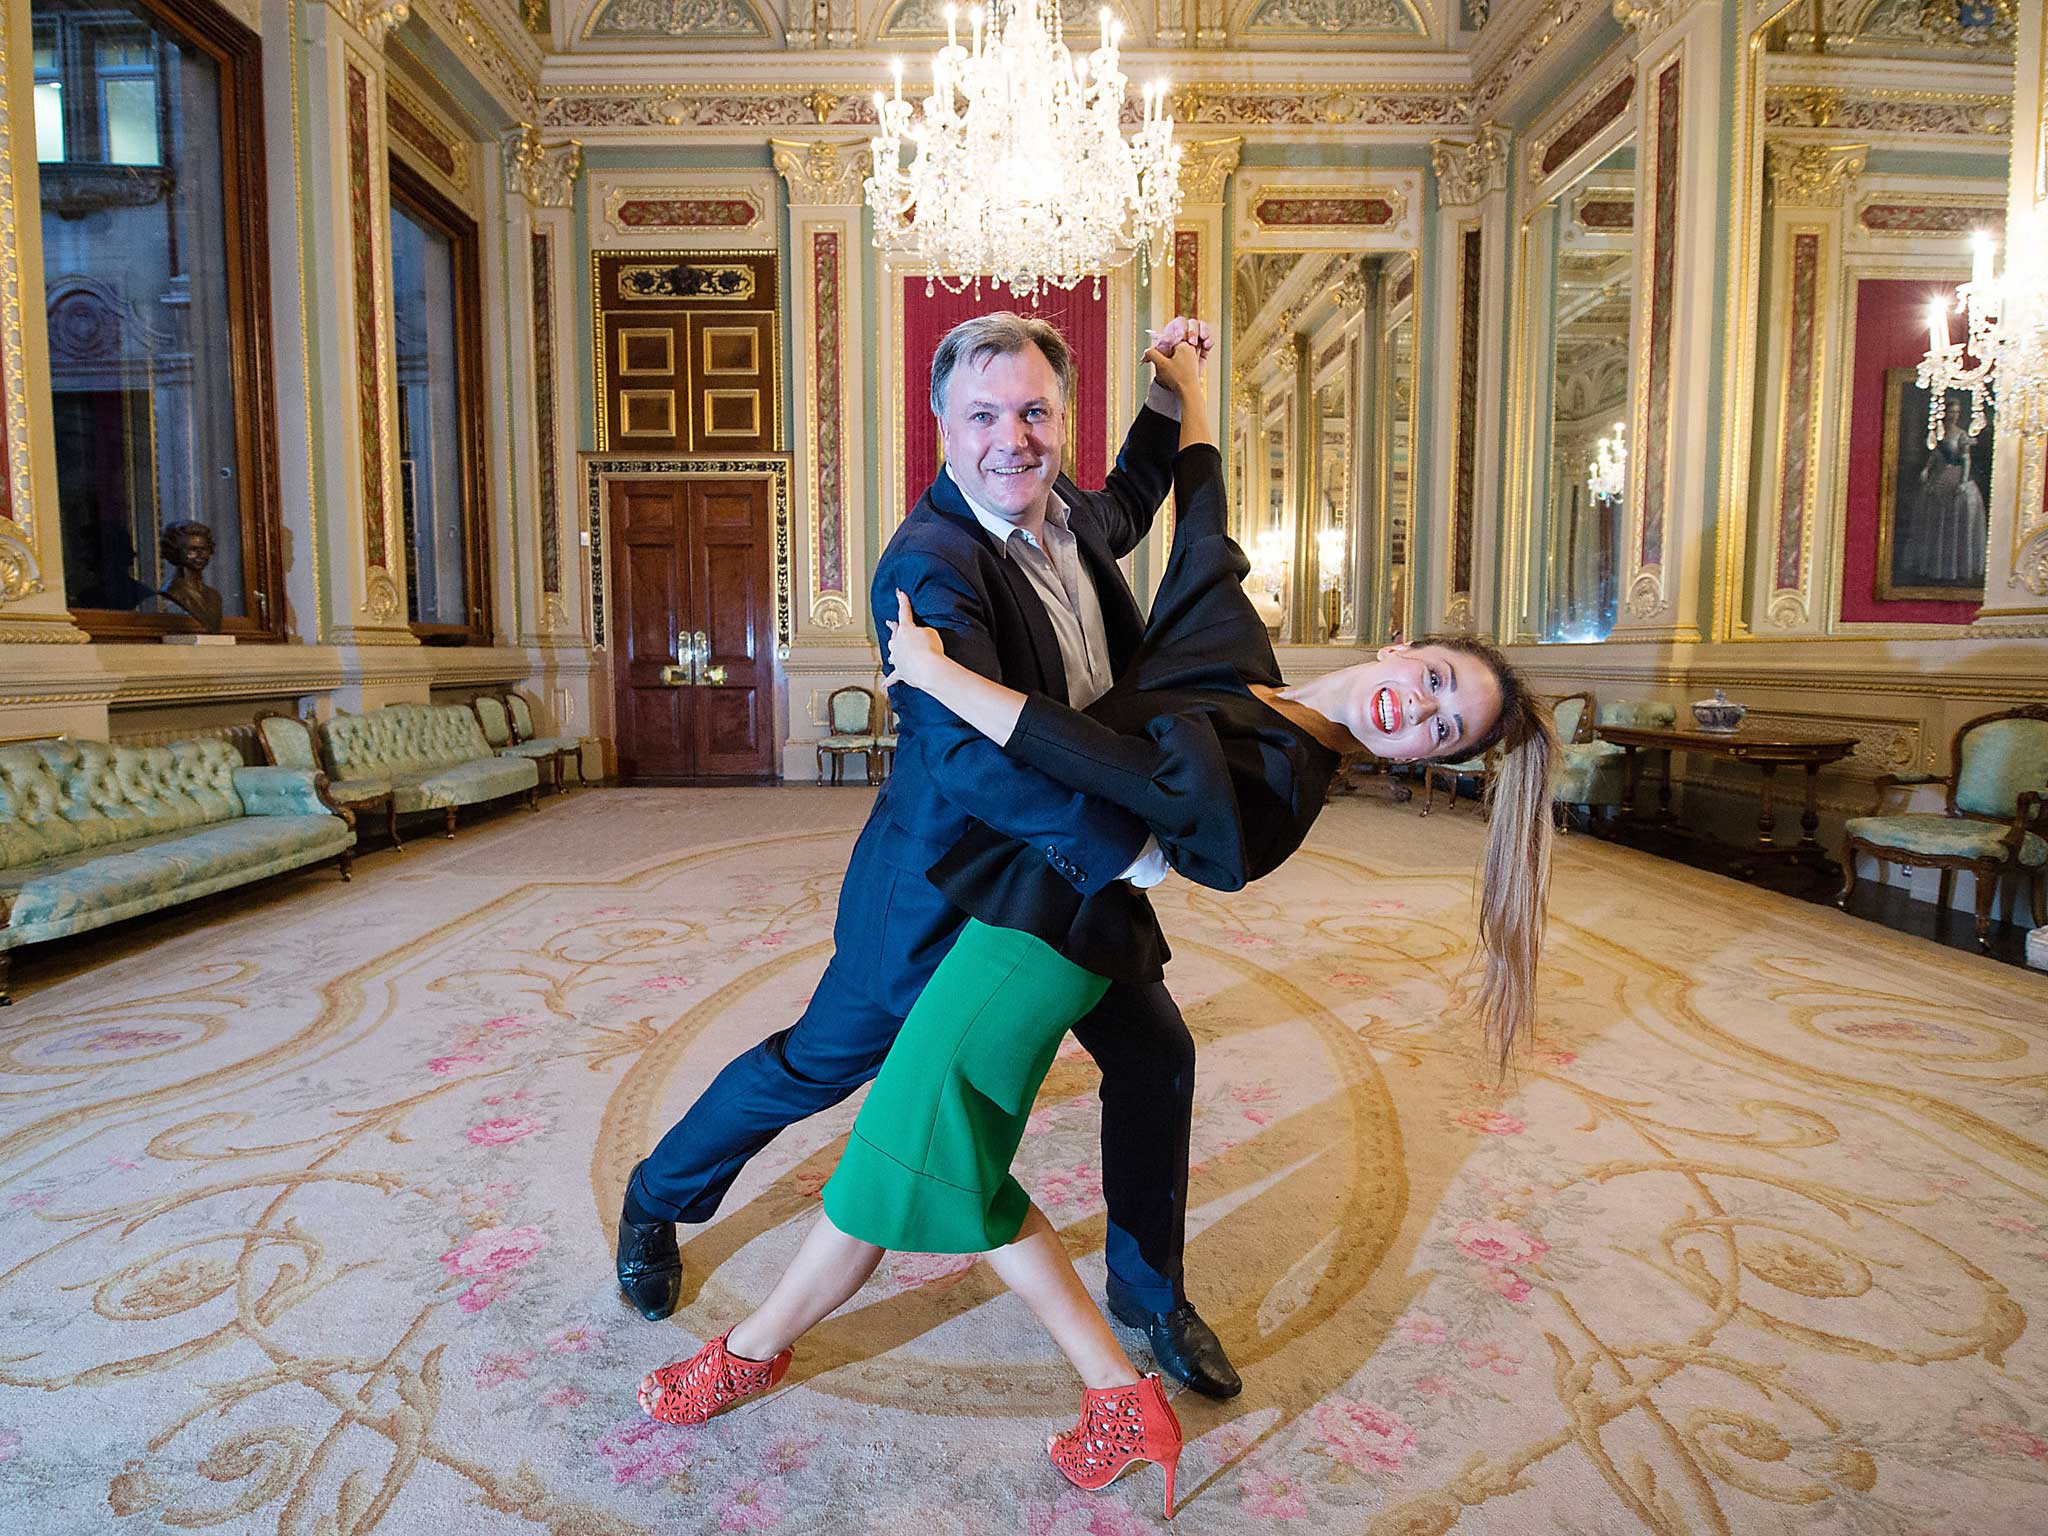 Former Economic Secretary to the Treasury Ed Balls and his dance partner Katya Jones from BBC dance programme Strictly Come Dancing